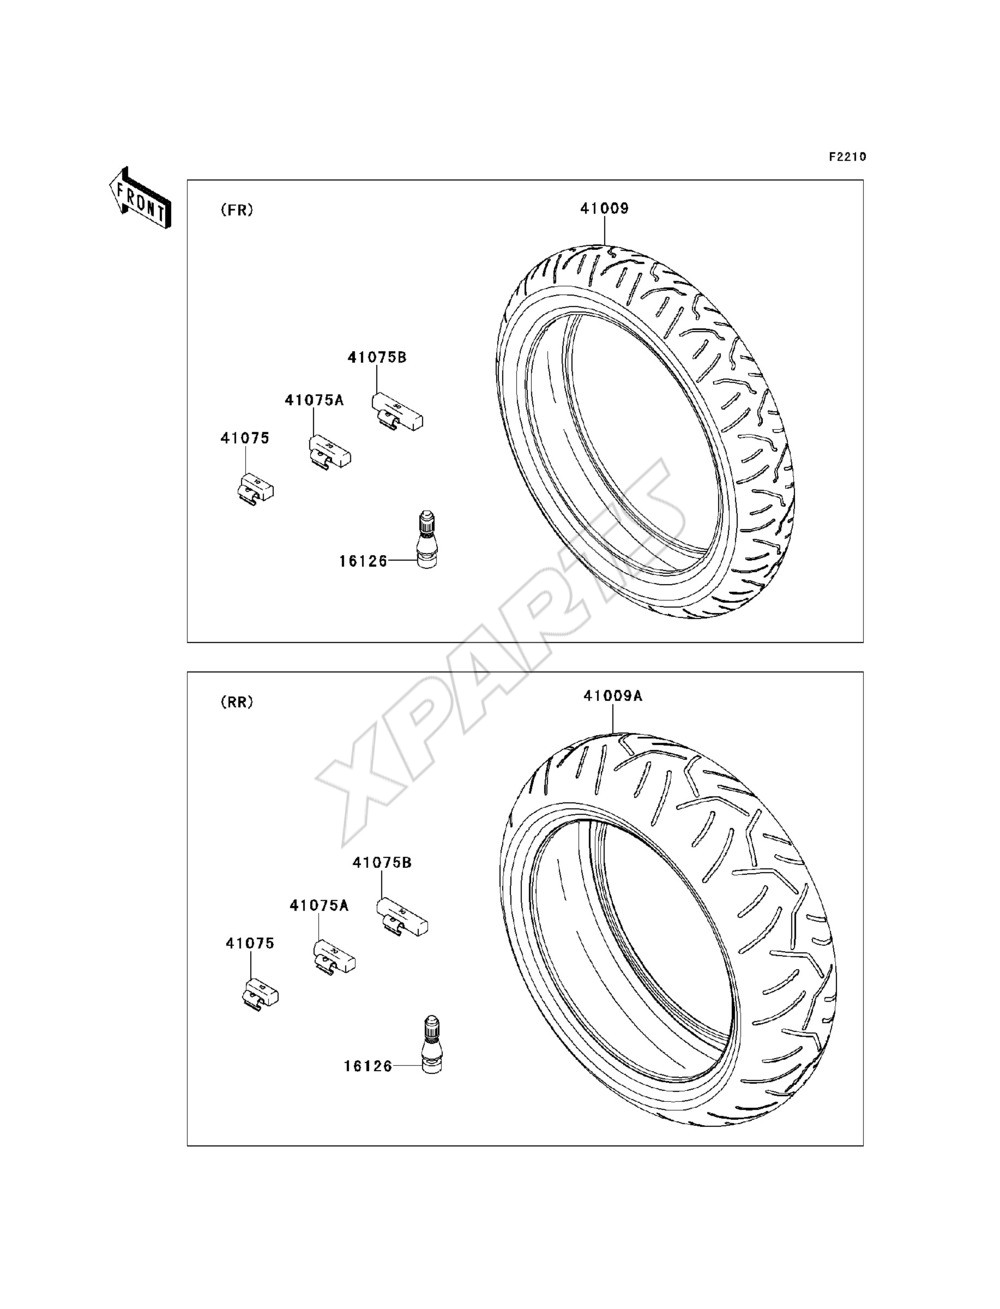 Picture for category Tires